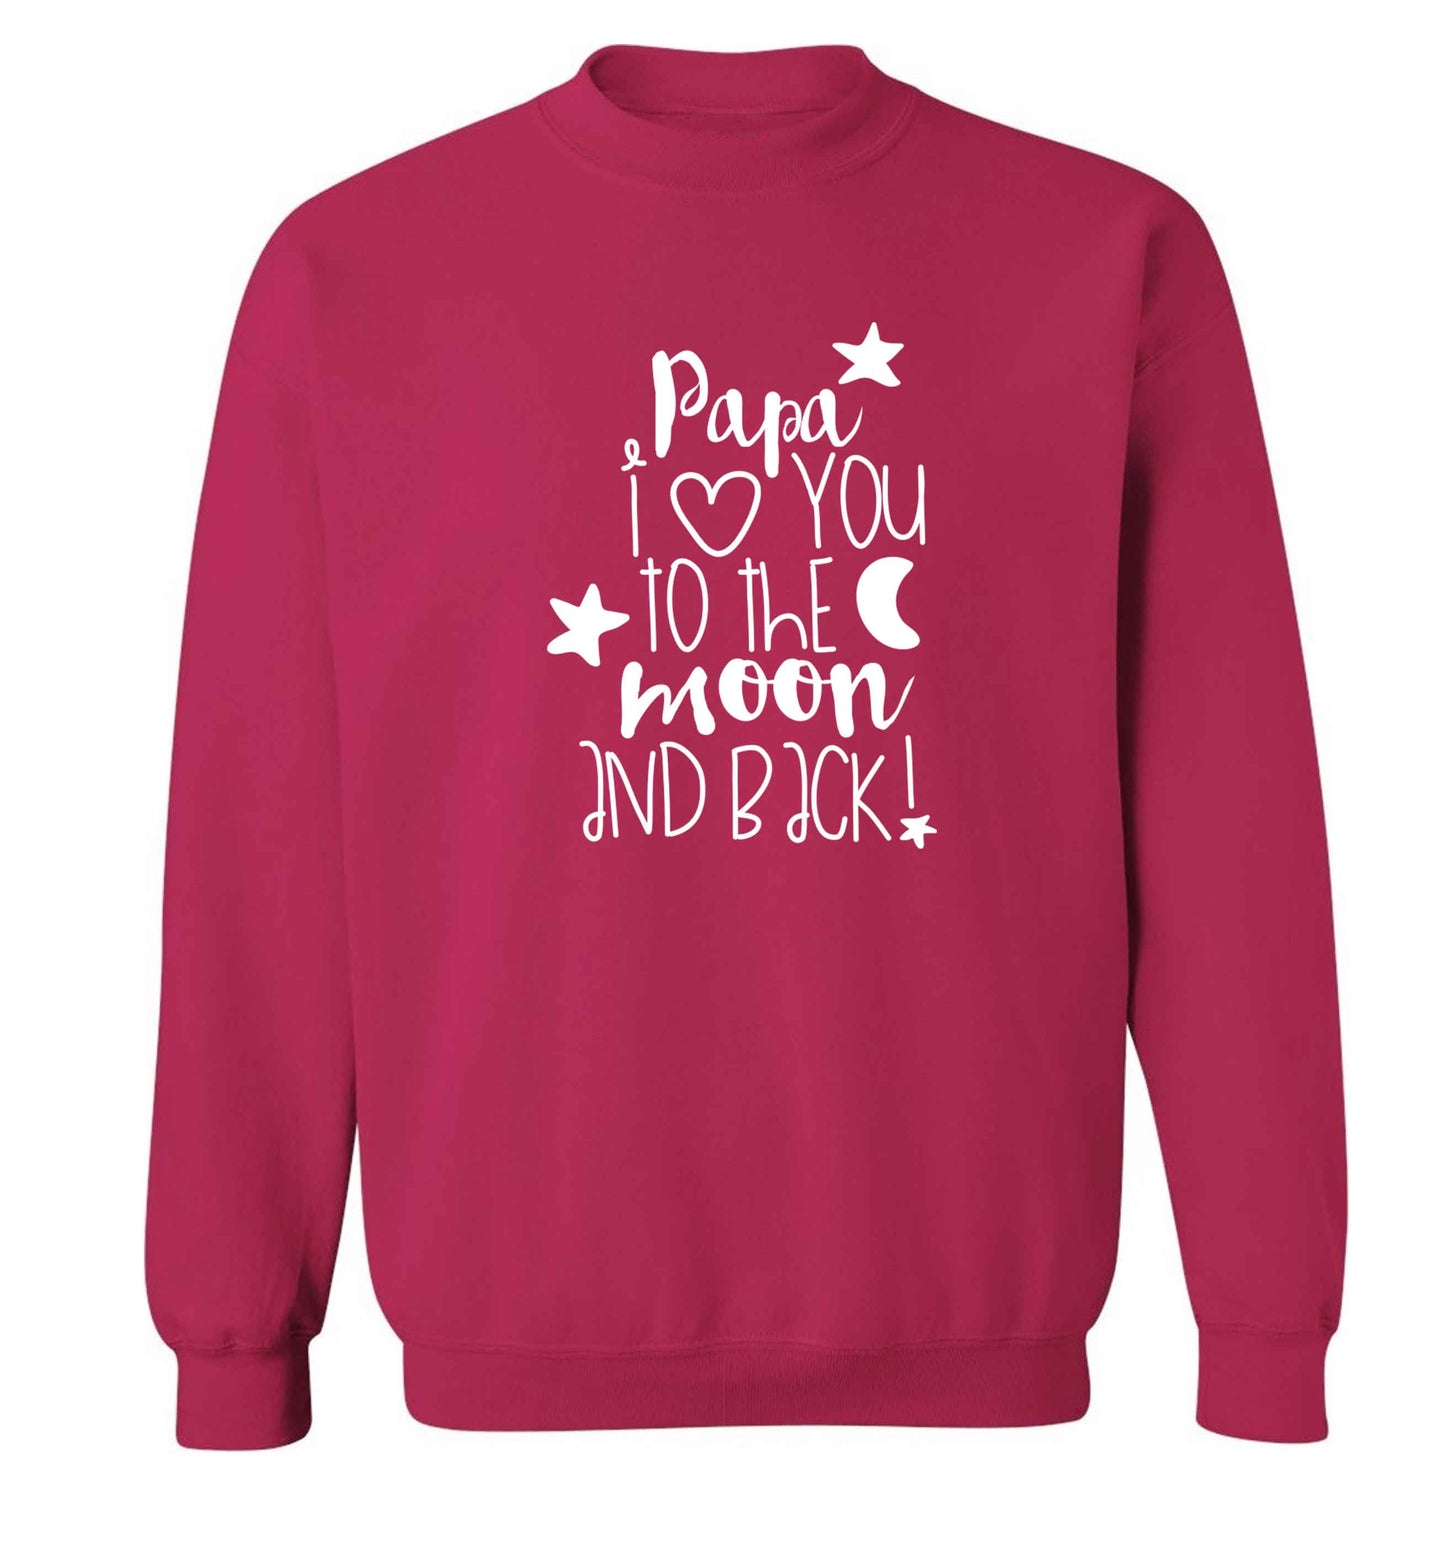 Papa I love you to the moon and back adult's unisex pink sweater 2XL